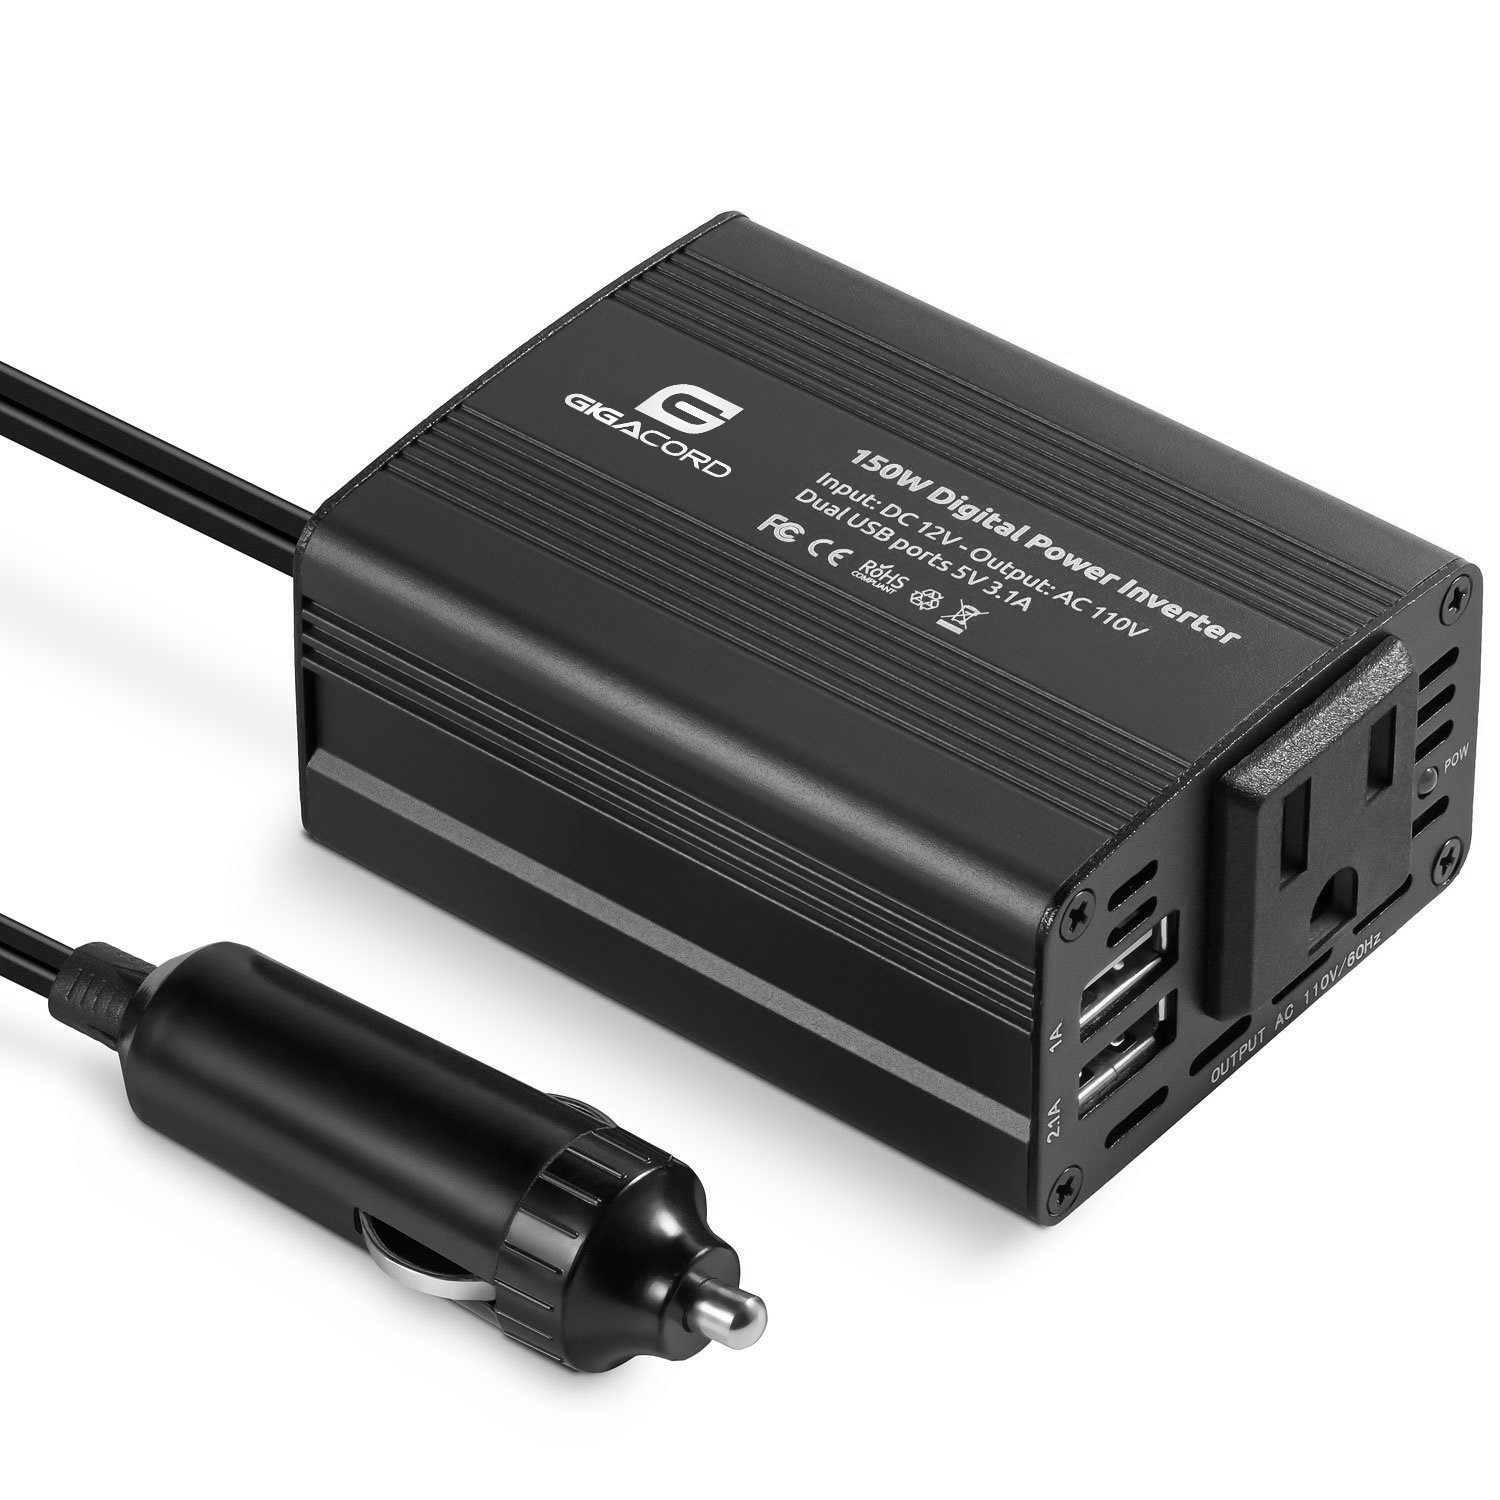 Laptop Computer Car Charger with Plug Outlet Dc 12V to 110V AC Converter with 3.1A Dual USB Ports Power Inverter 150W Car Outlet Adapter for Plug Outlet 